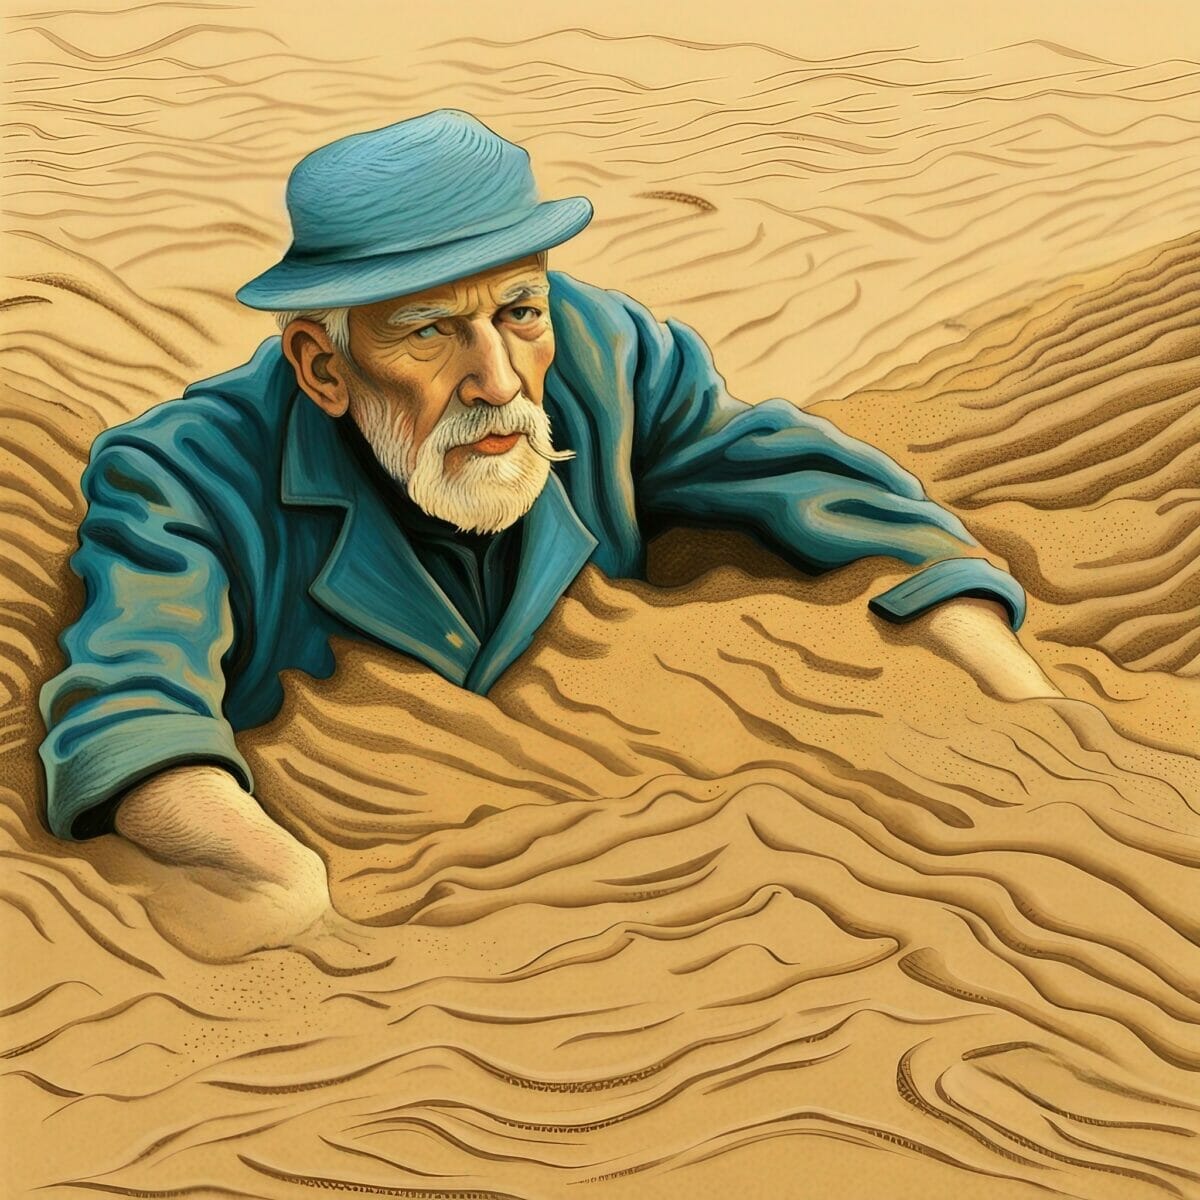 Sands of Time: Image 6. 	 A man wearing blue hat and coat, buried up to his chest in the sand.